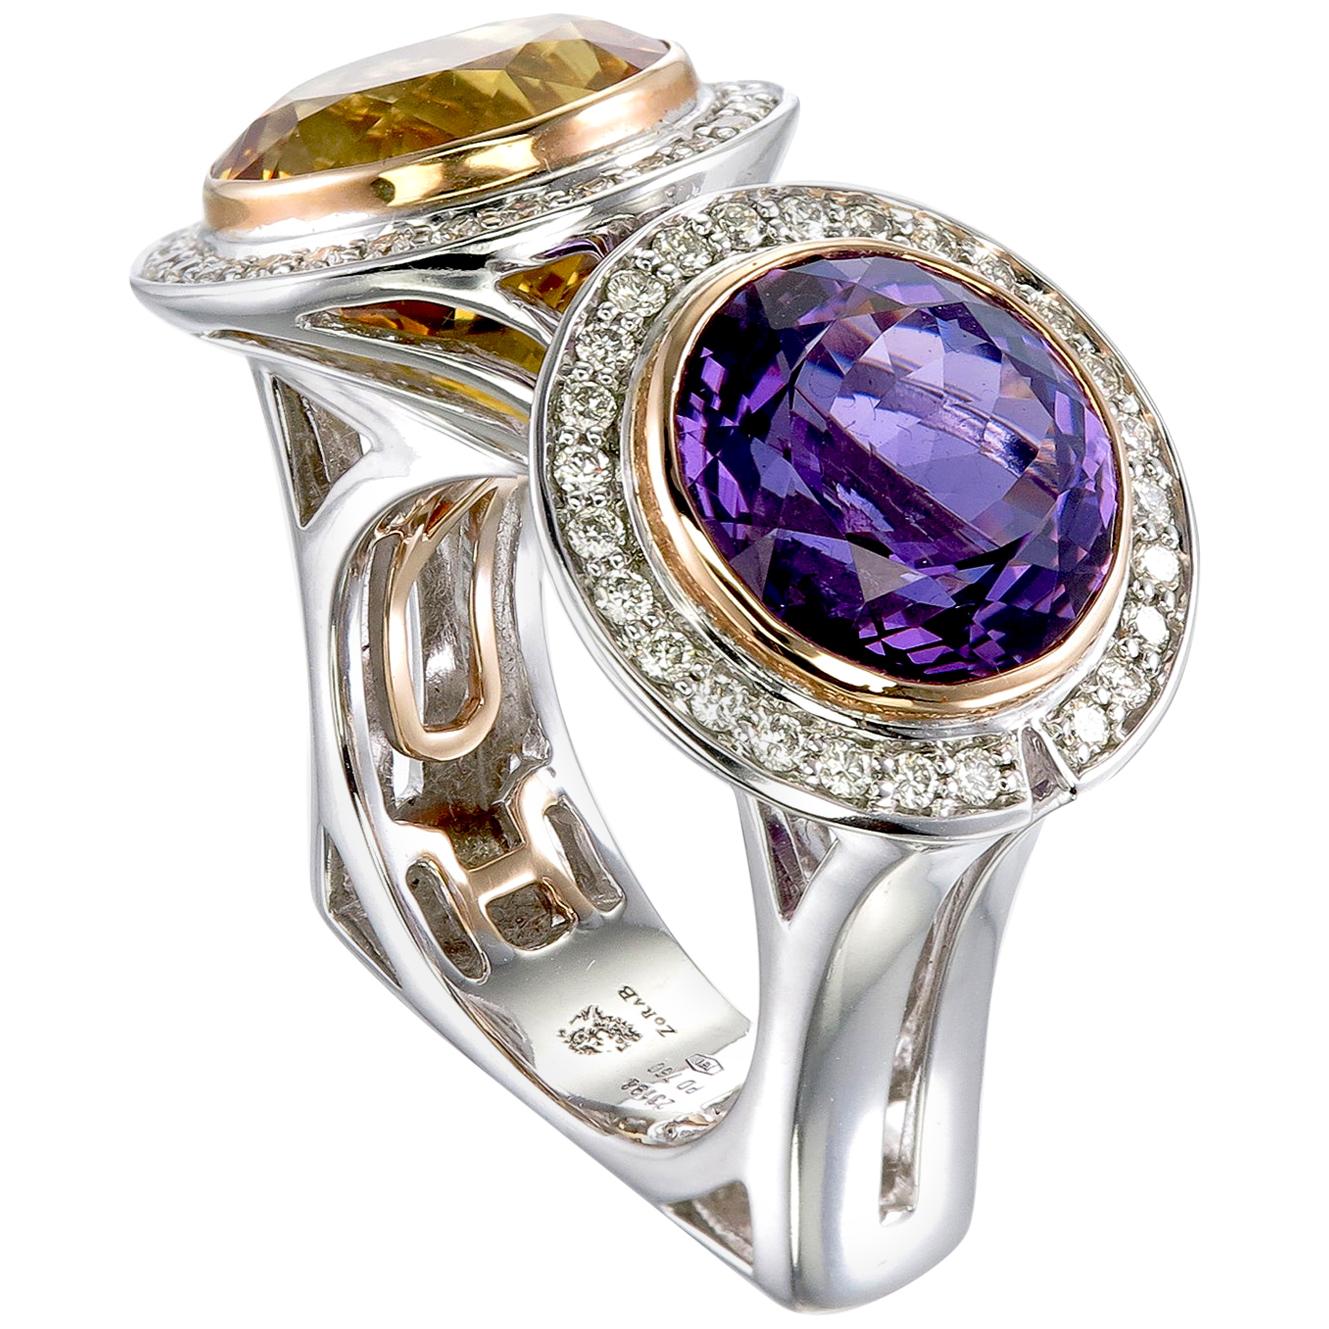 Zorab Creation Amethyst and Citrine Couple Mignone Ring